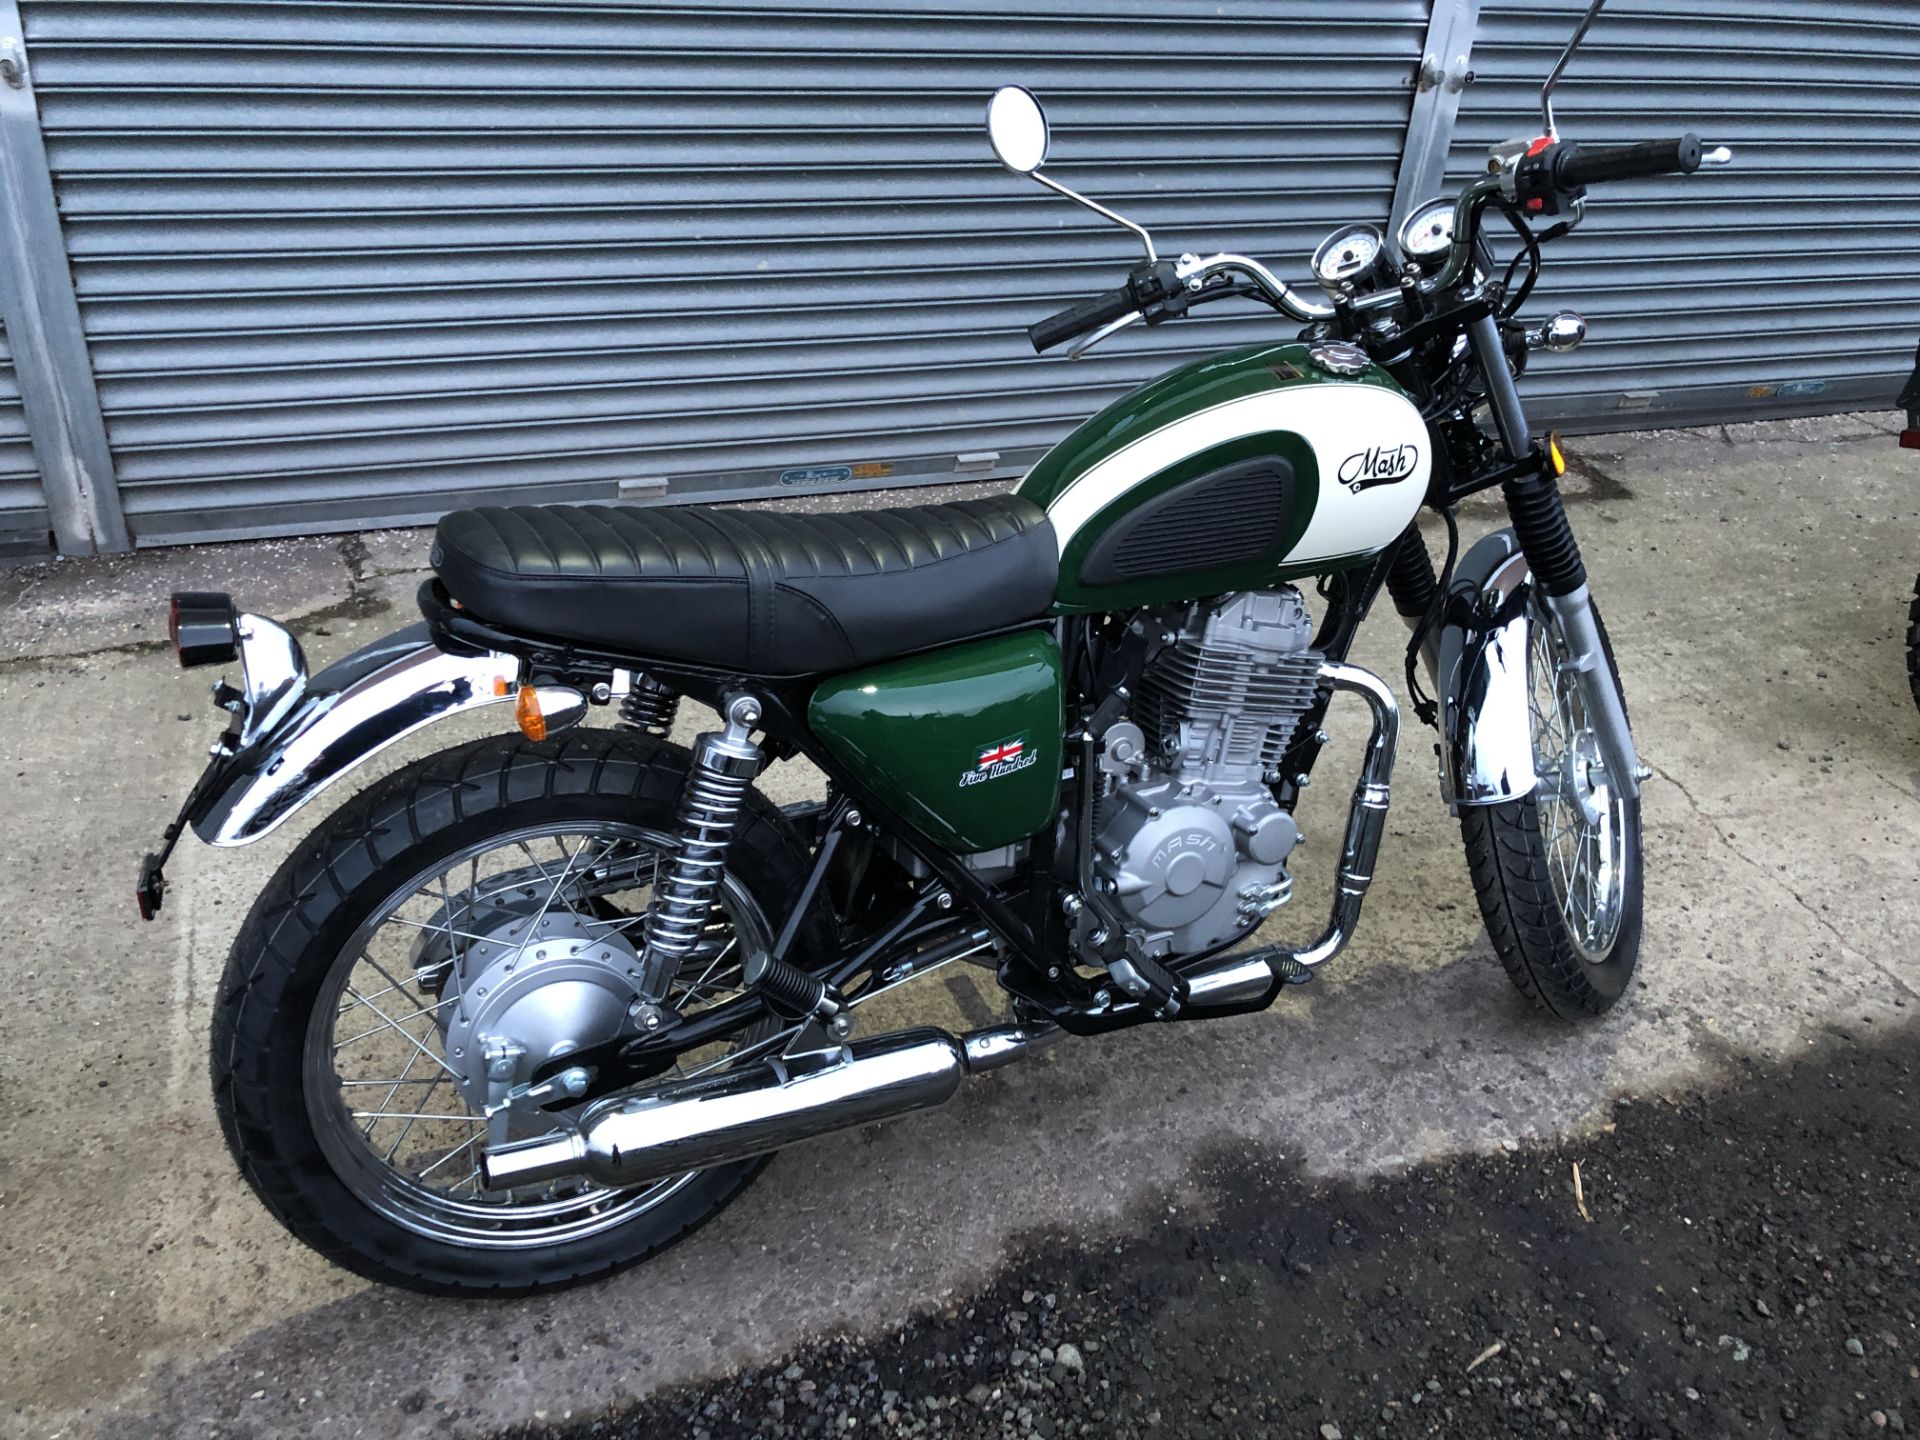 Mash Roadstar 400 As New Condition was collected from Main Dealer after the Mash Importer in the - Image 3 of 17